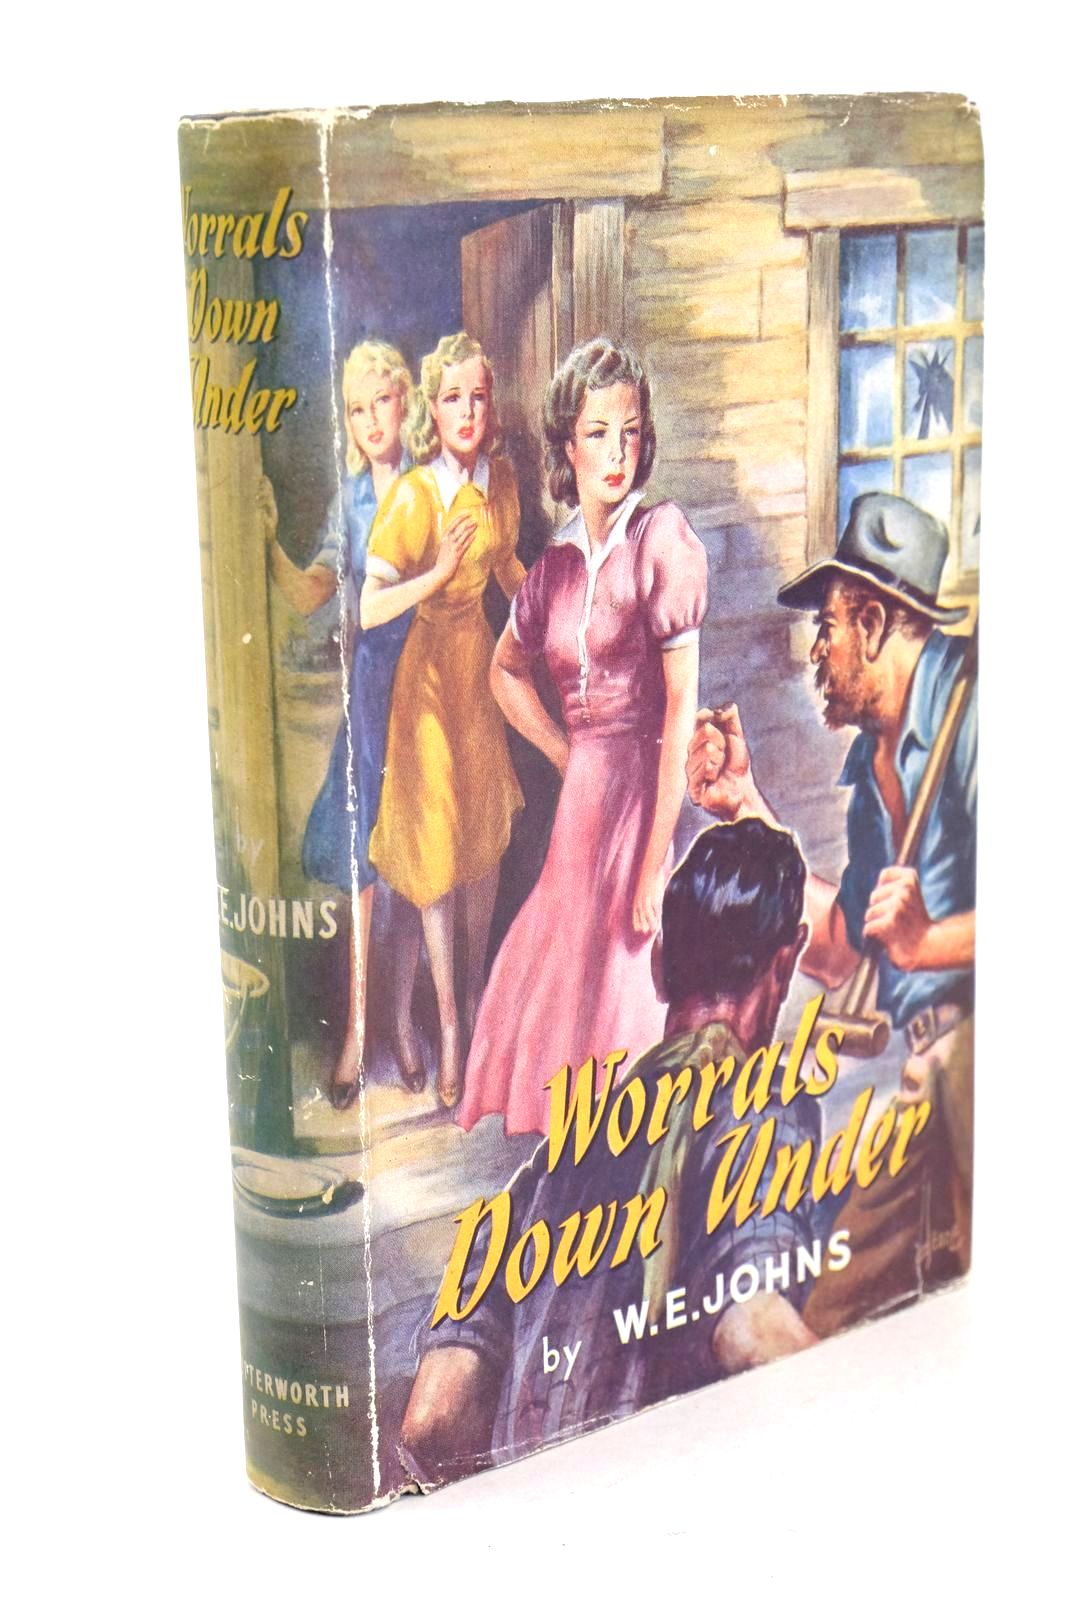 Photo of WORRALS DOWN UNDER written by Johns, W.E. published by Lutterworth Press (STOCK CODE: 1326237)  for sale by Stella & Rose's Books